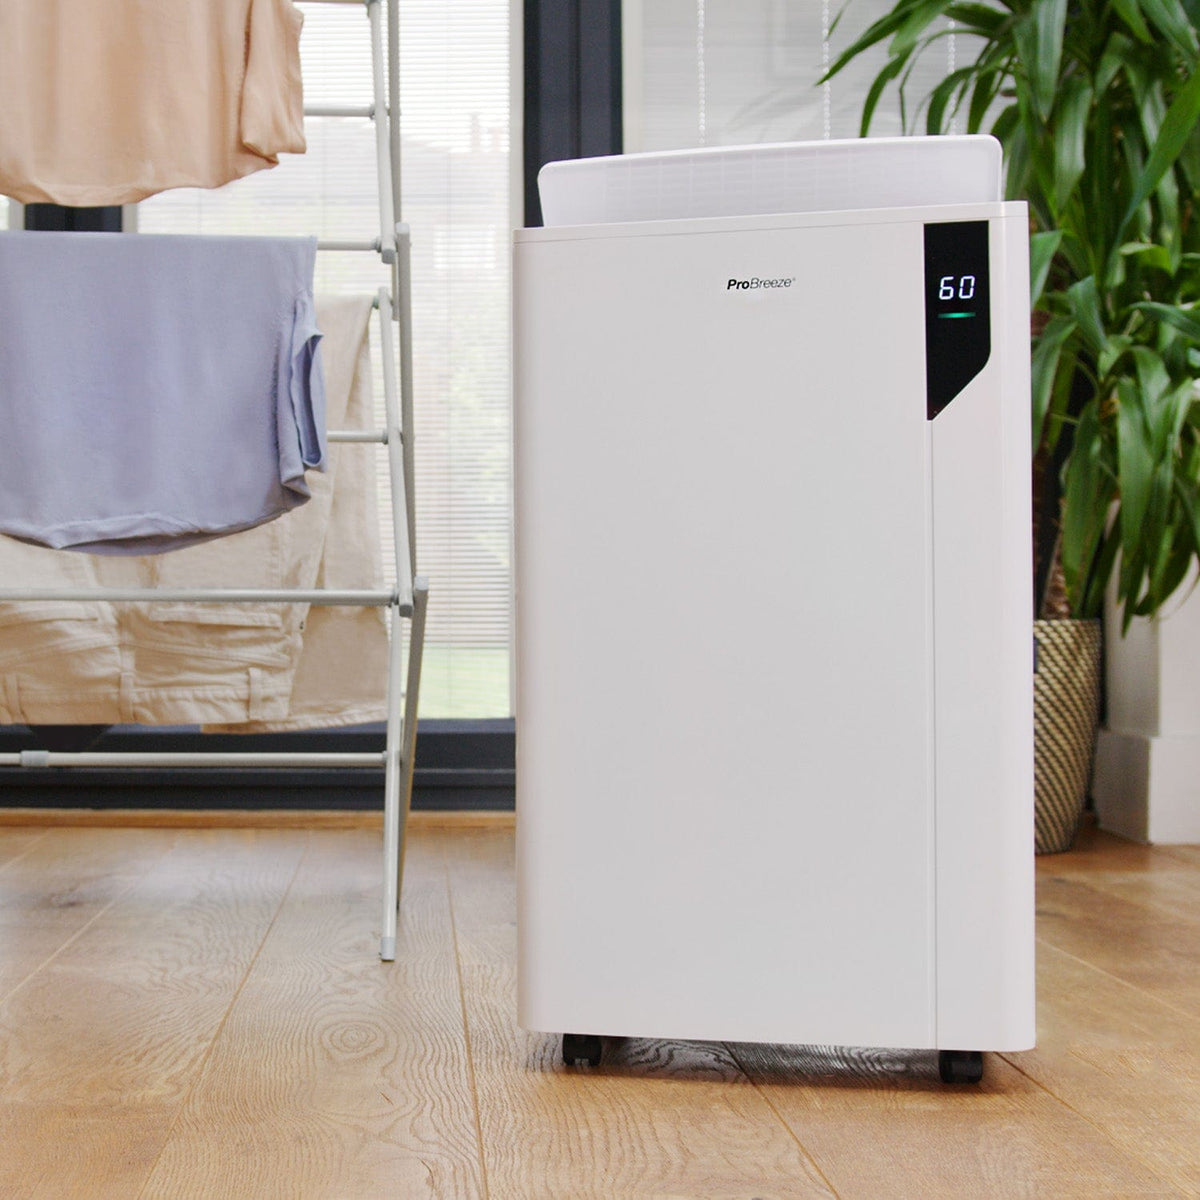 Refurbished - 20L Premium Dehumidifier with Special Laundry Mode